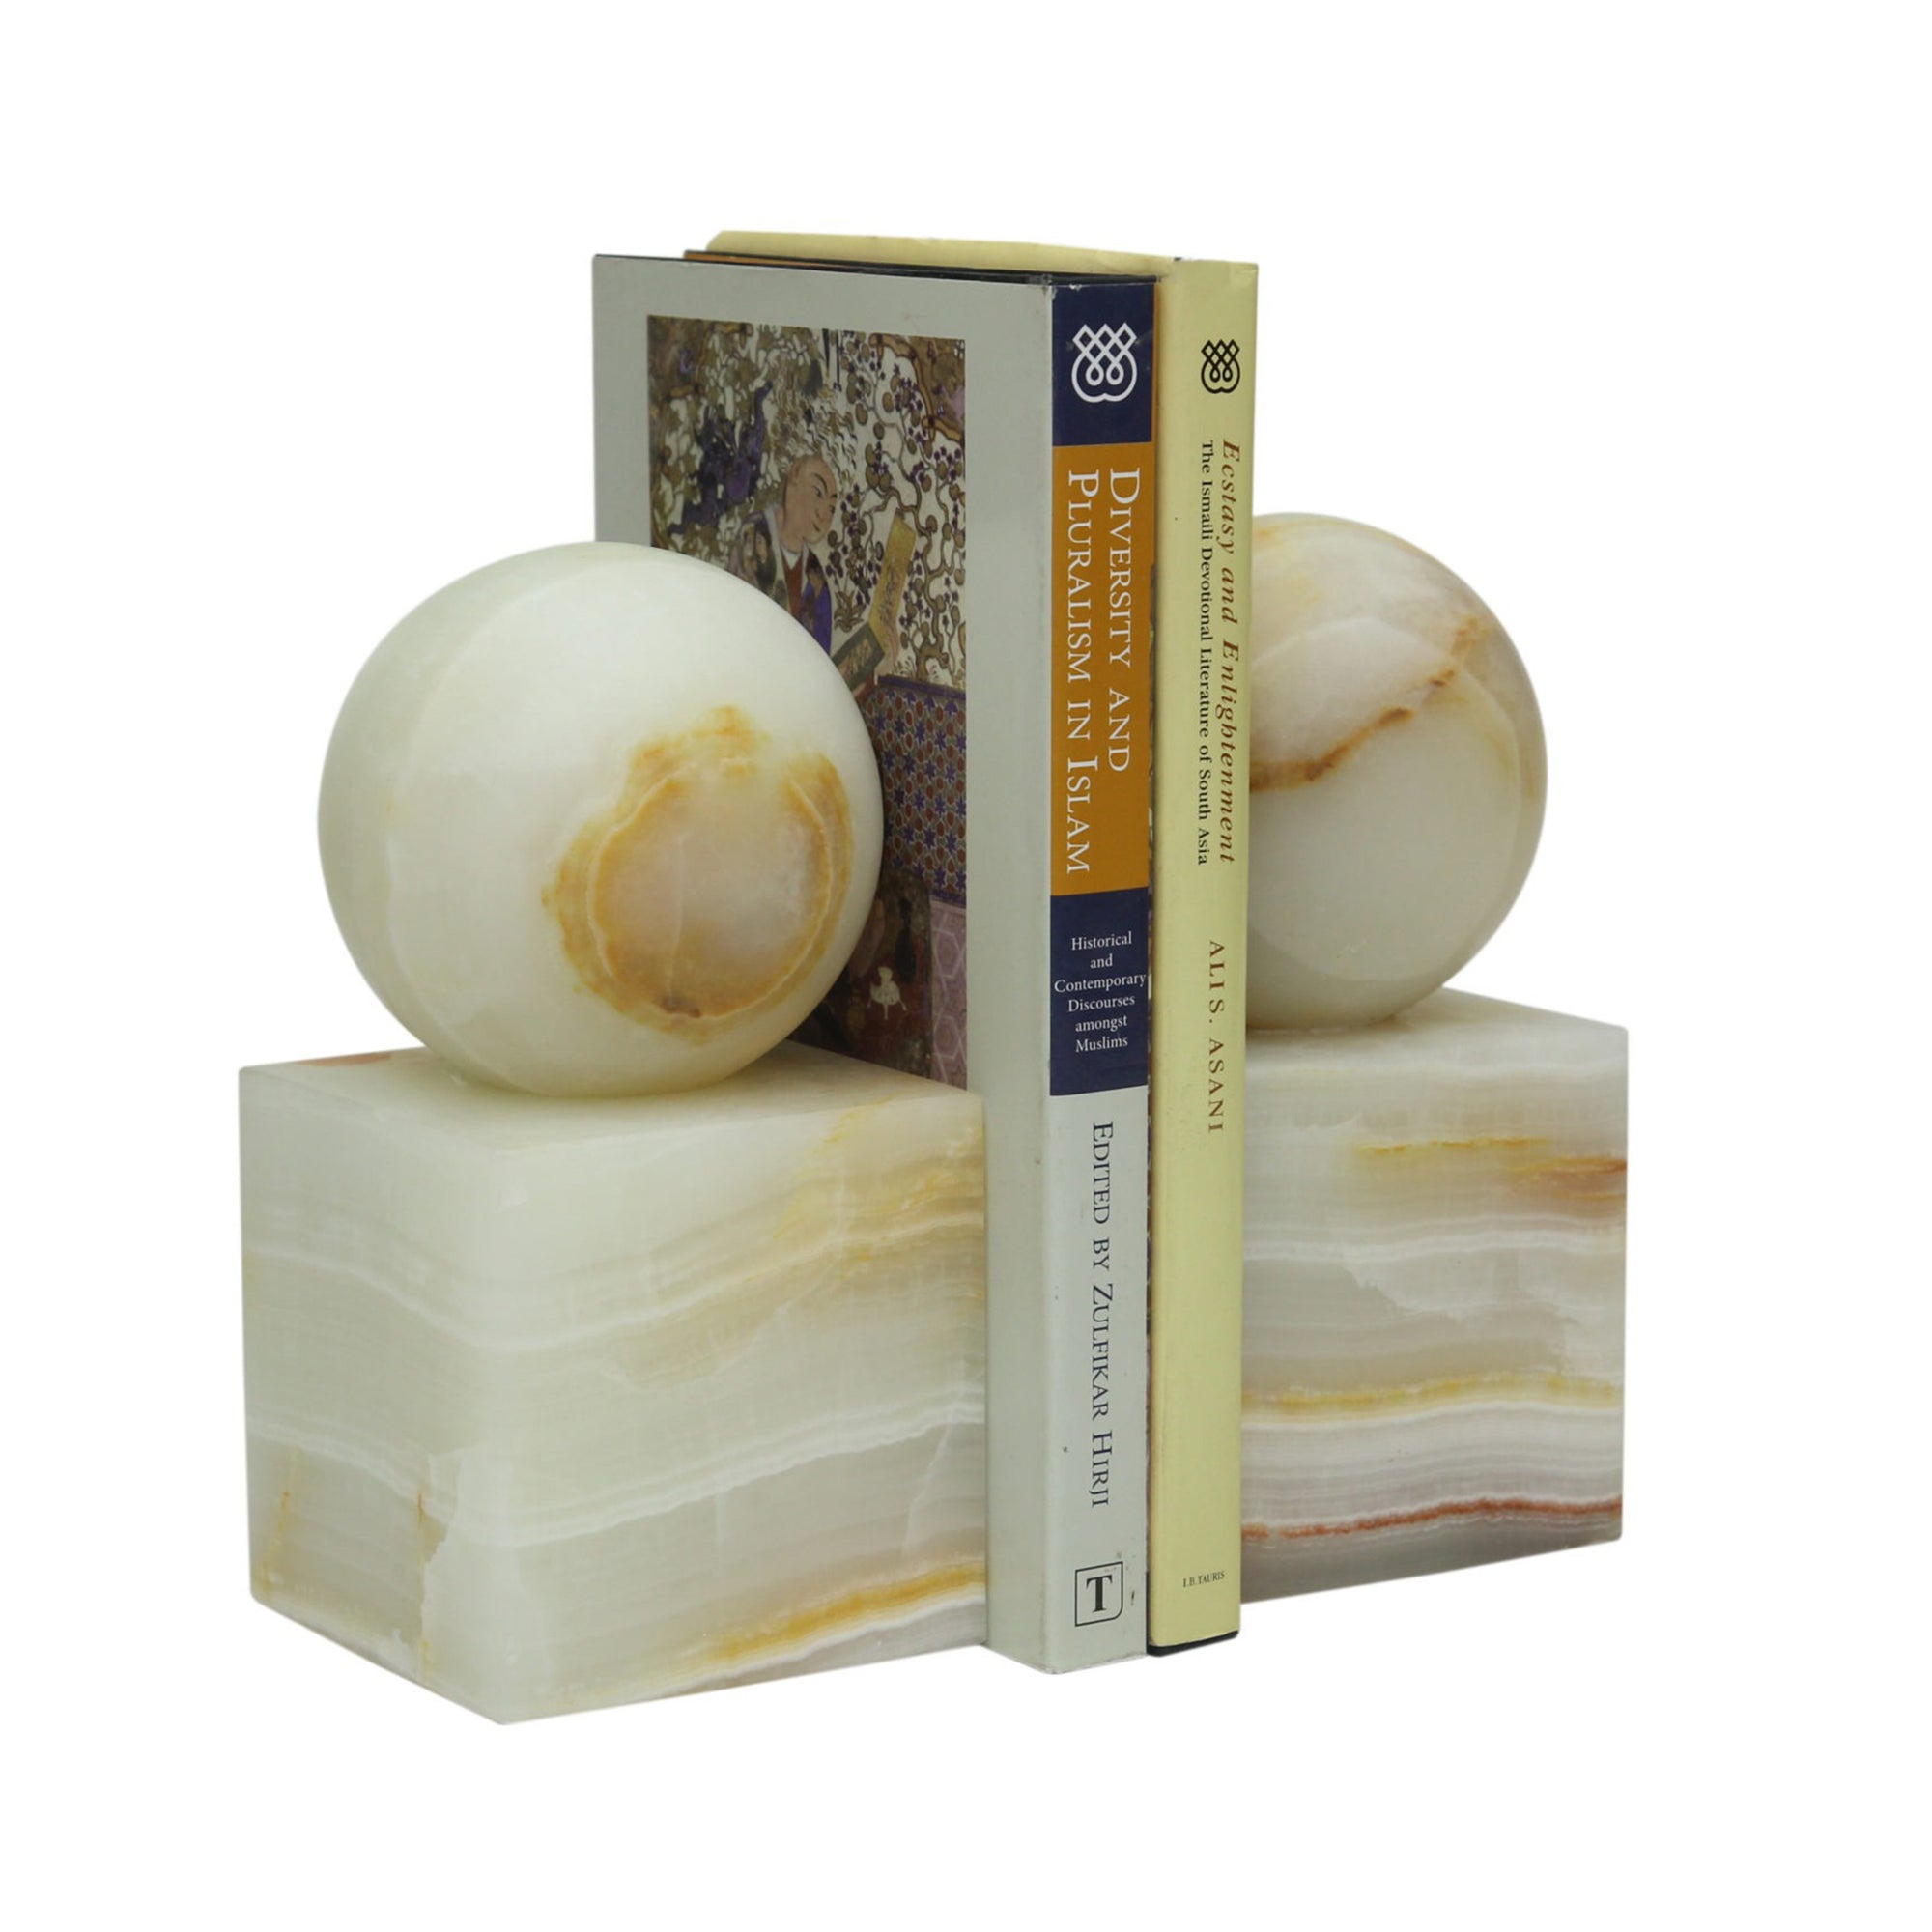 apollo marble bookends black and gold